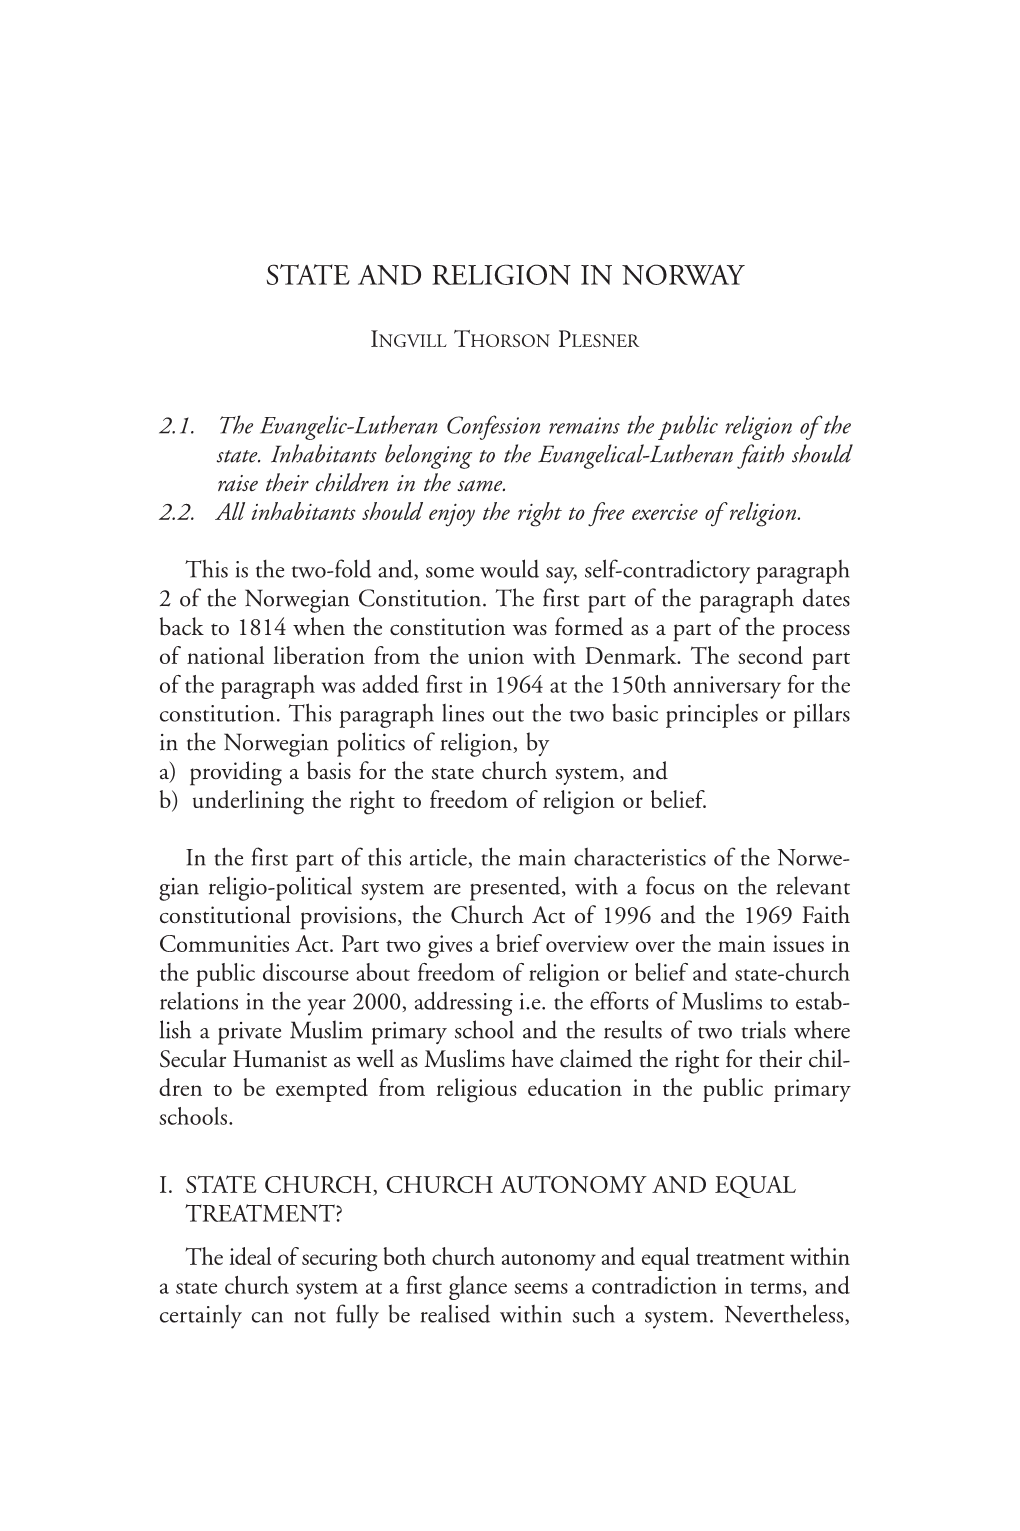 State and Religion in Norway